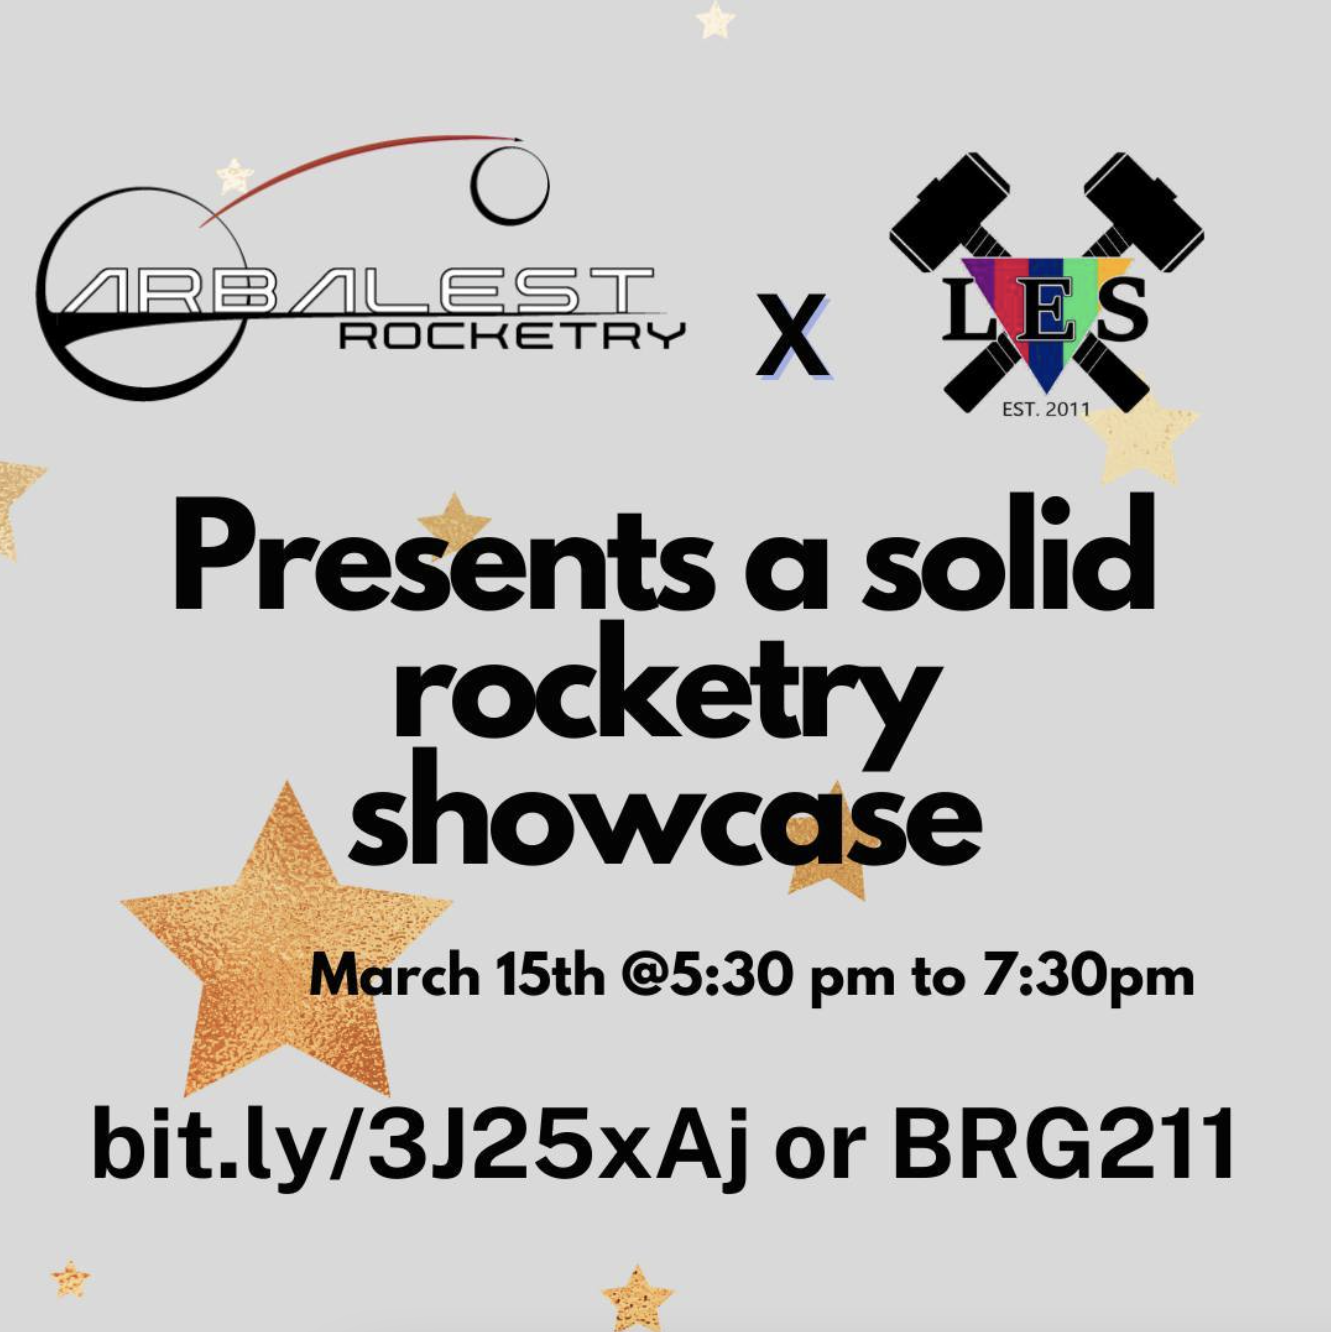 LES x Arbalest Rocketry Solid Rocket Showcase poster